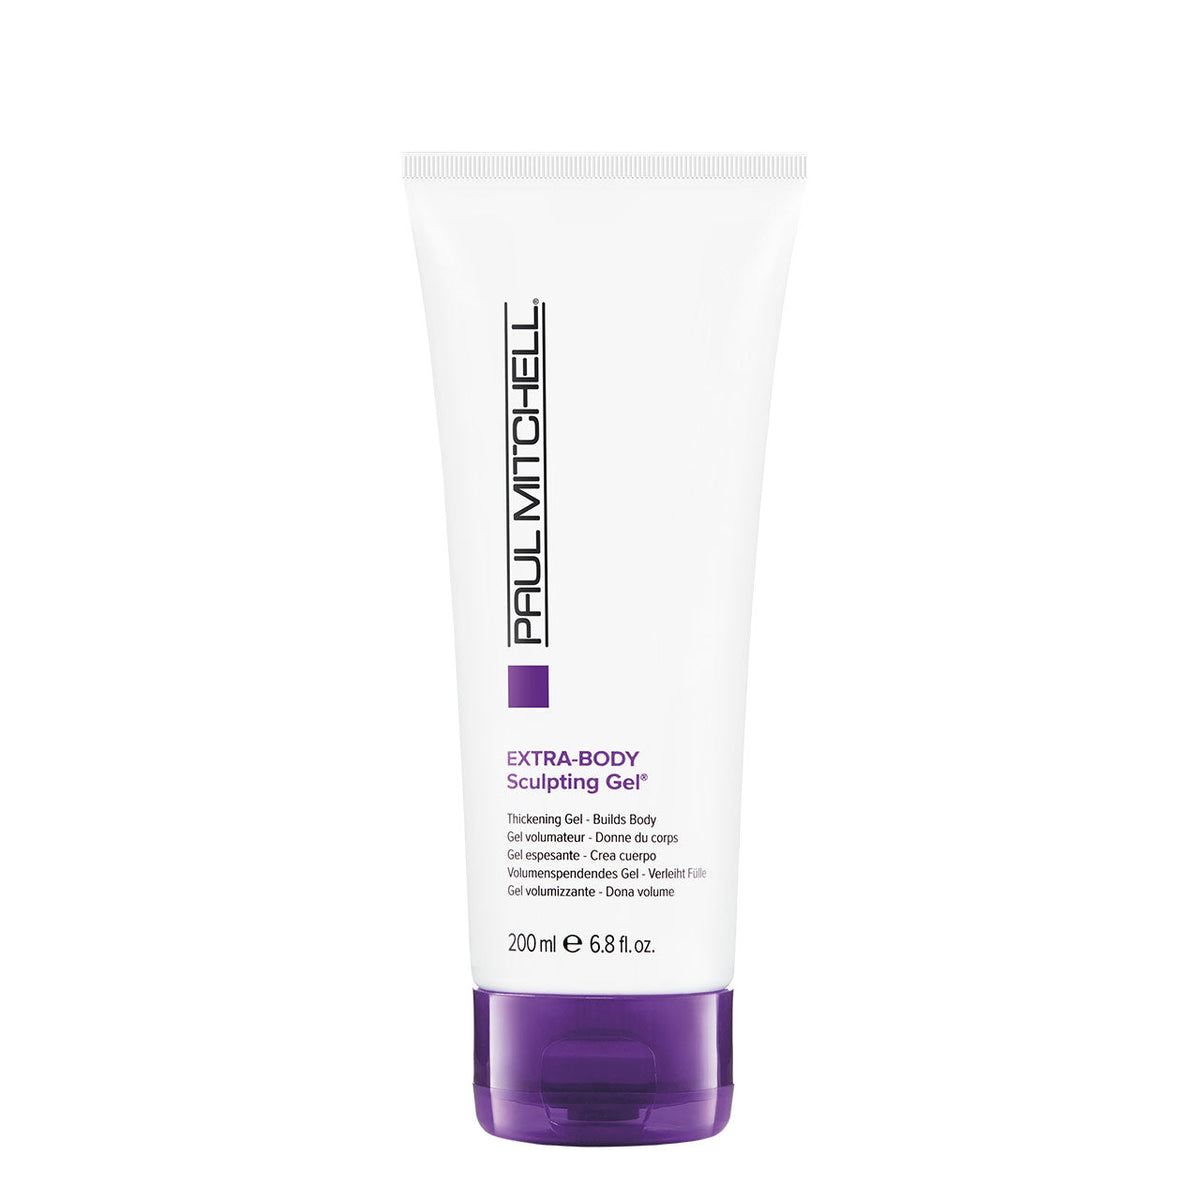 Extra-Body Sculpting Gel - by Paul Mitchell |ProCare Outlet|